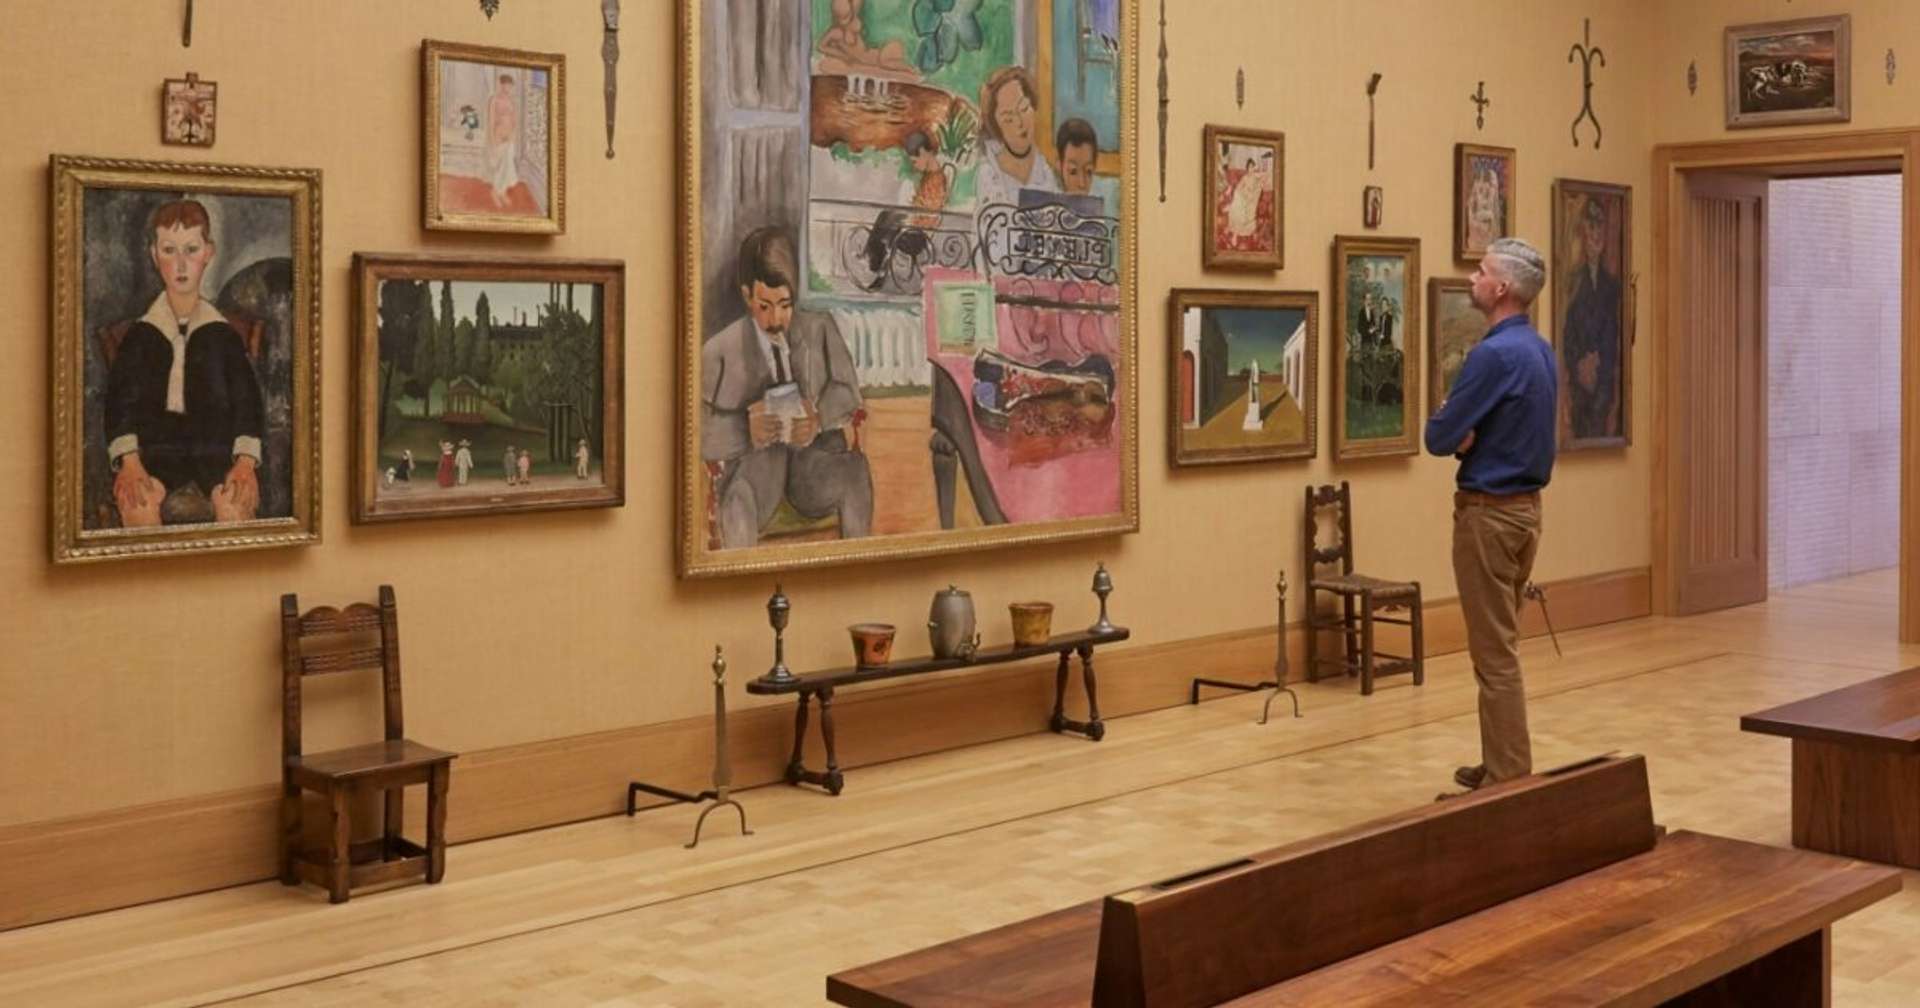 An image of the Barnes Foundation in Philadelphia. A male museum visitor is seen admiring a series of work on the wall, displayed against a yellow background.